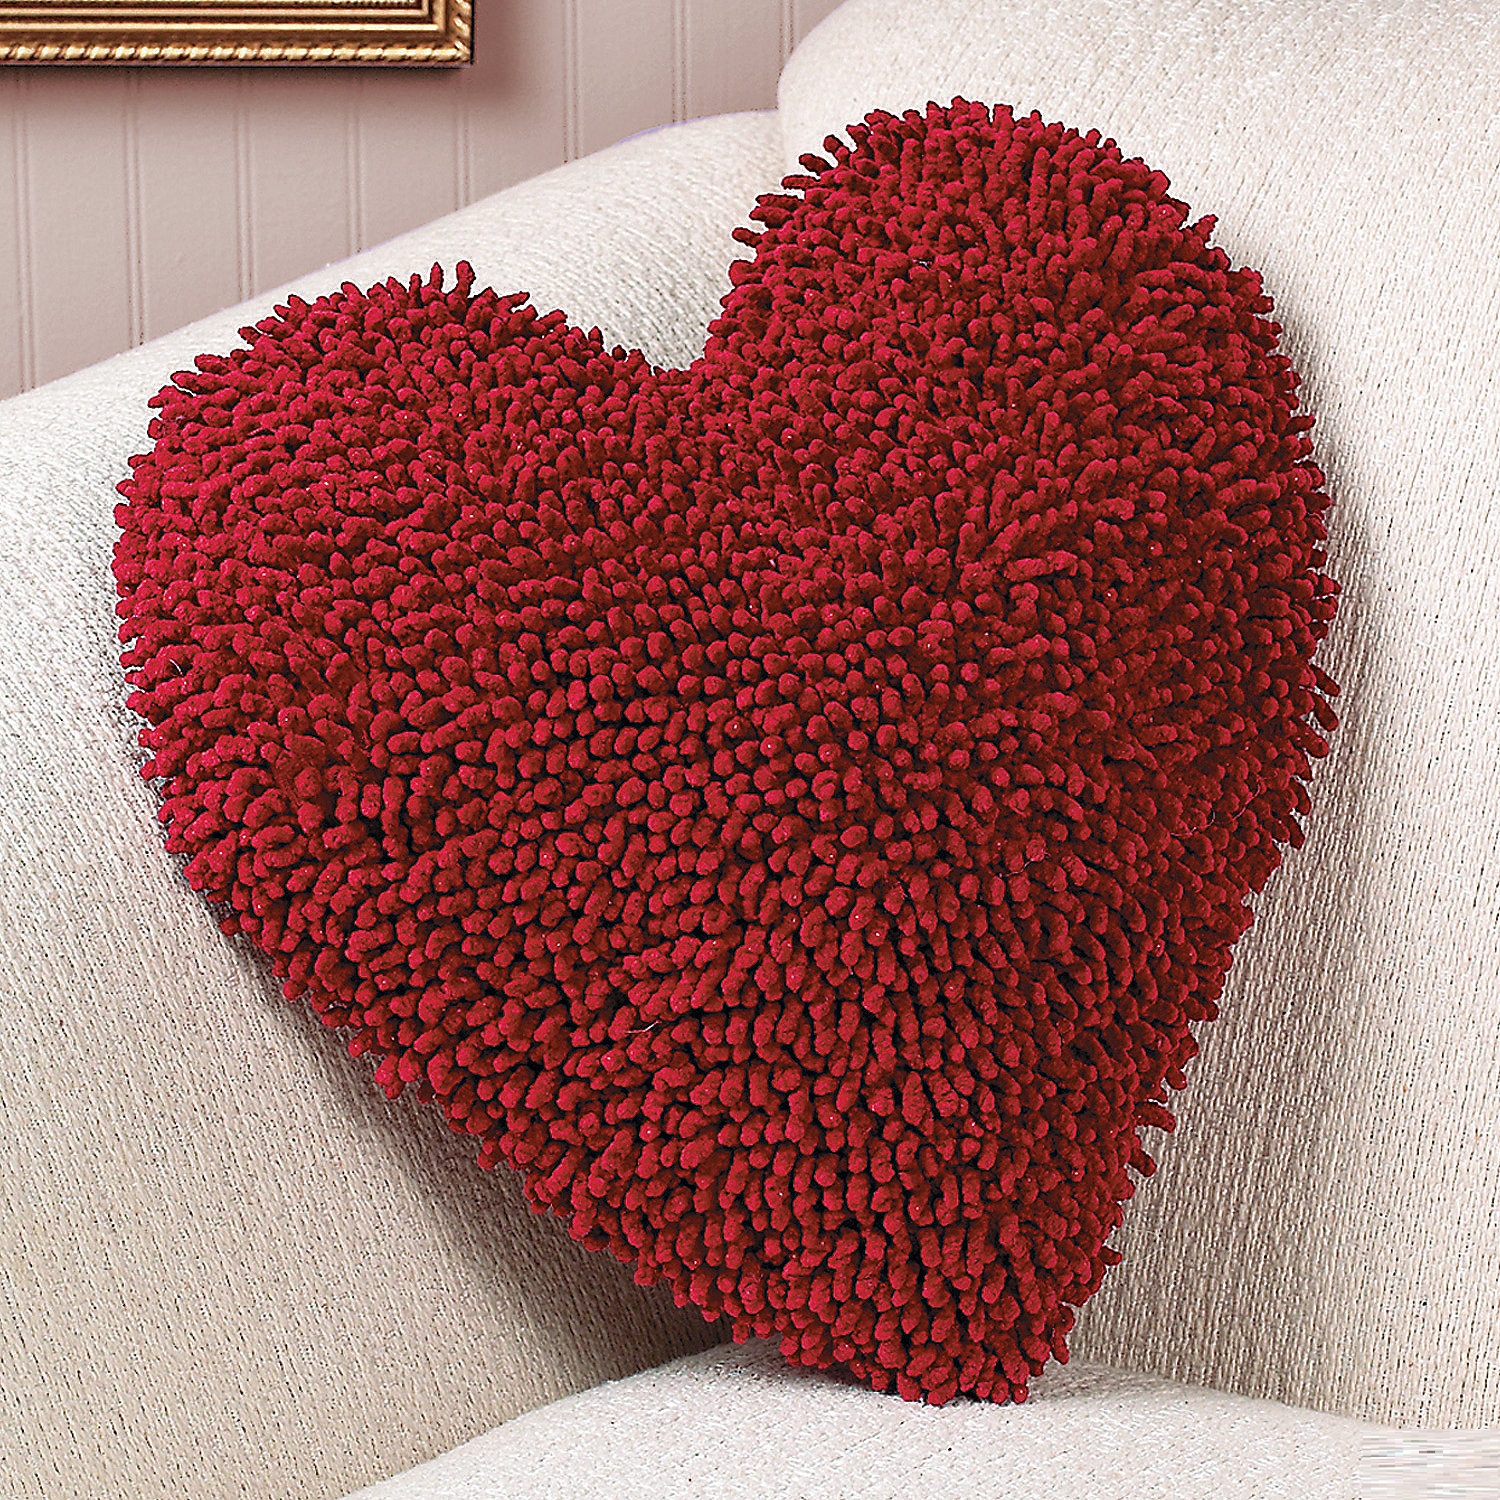 red-heart-chenille-pillow_91_4347